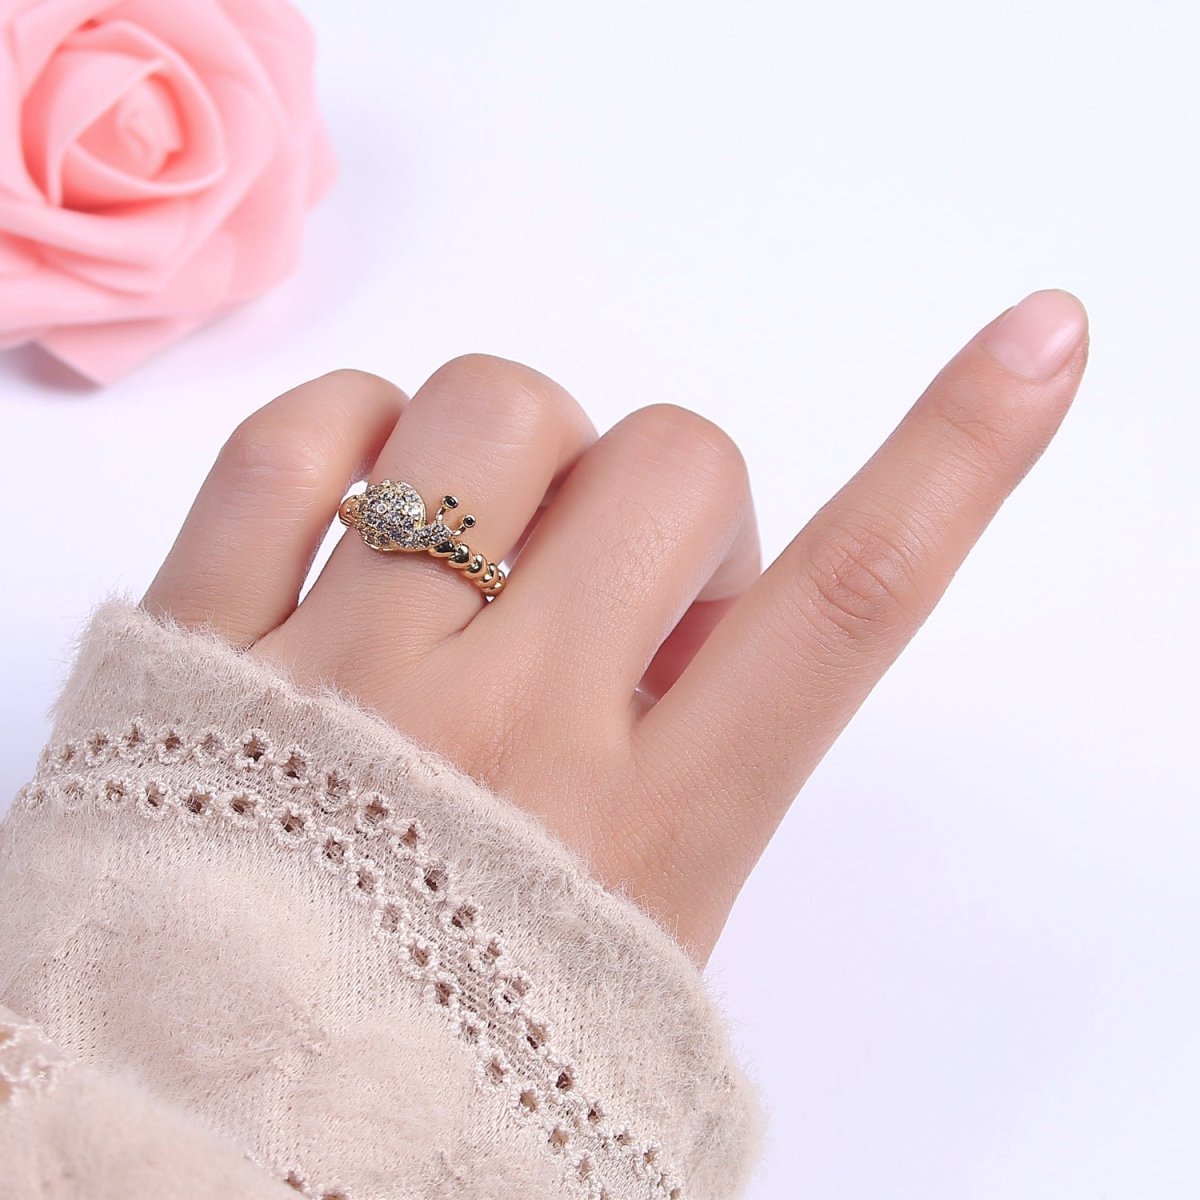 Micro Pave Snail Ring, Heart Textured Gold Adjustable Band Ring, 24K Gold Filled Nature Ocean Wildlife Under The Sea Ring U-441 - DLUXCA